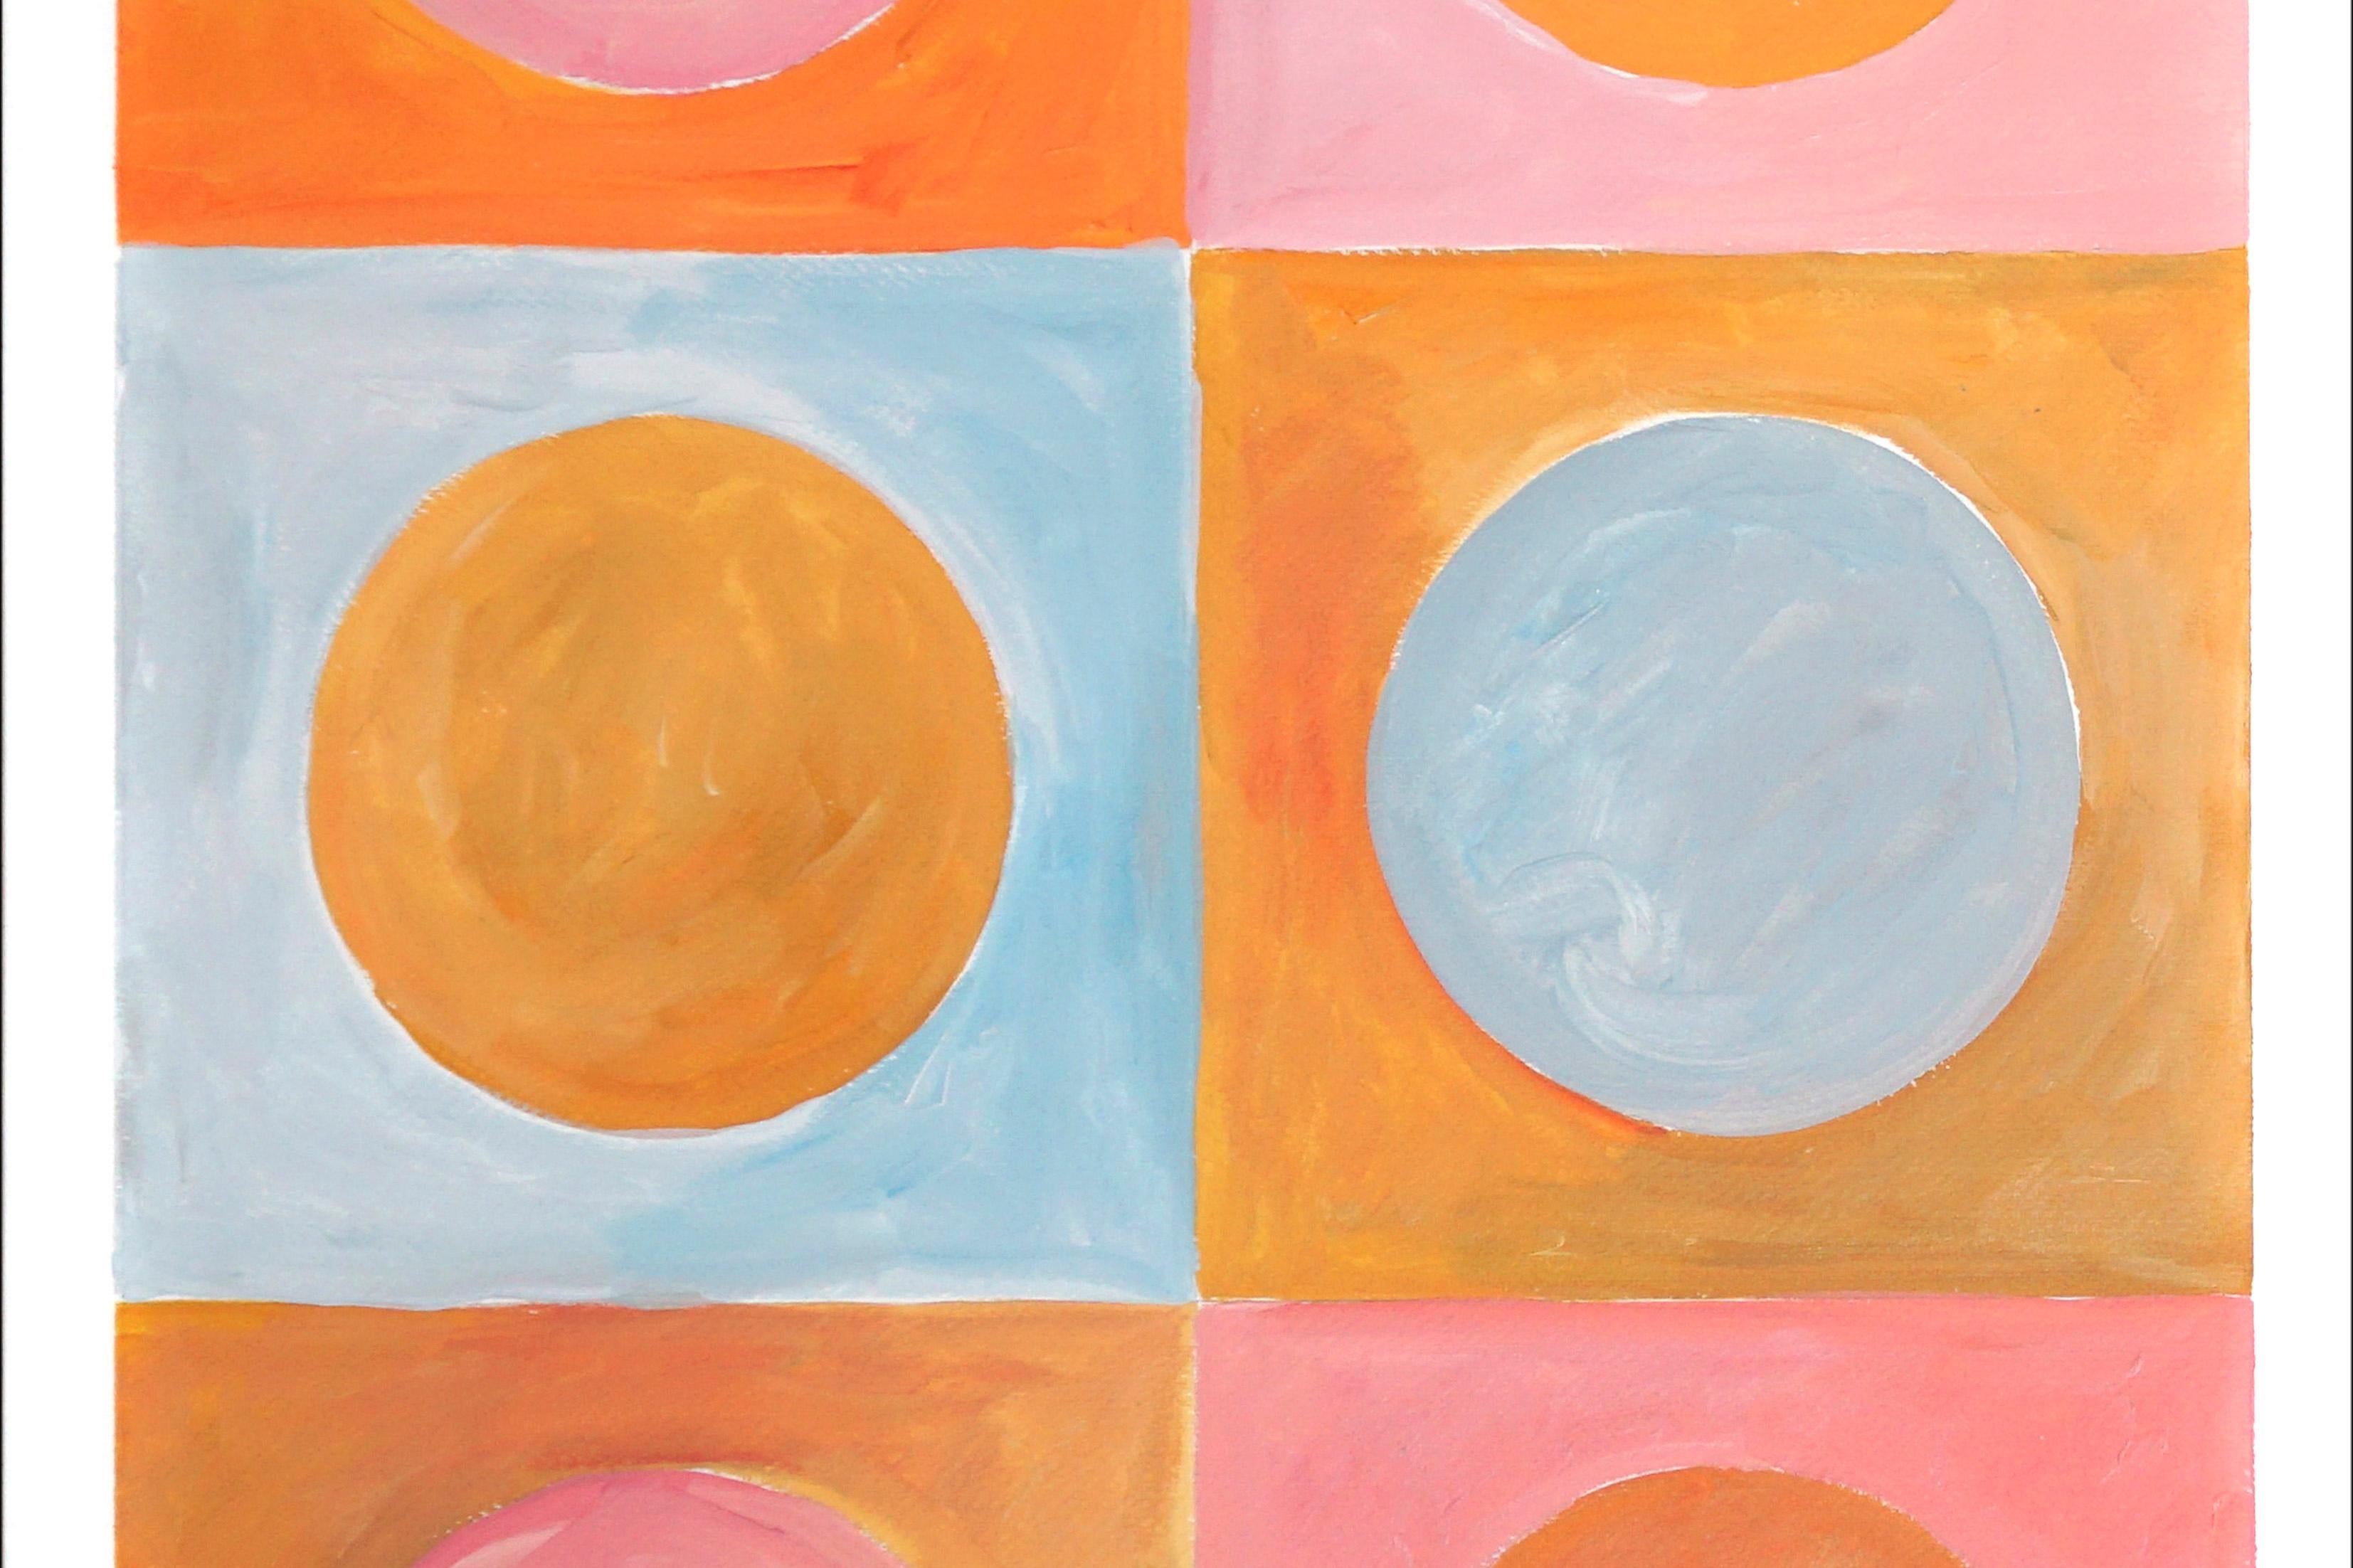 Sunset Sunny Lights, Warm Tones, Miami Vintage Pink and Orange Tiles Diptych - Art Deco Painting by Natalia Roman